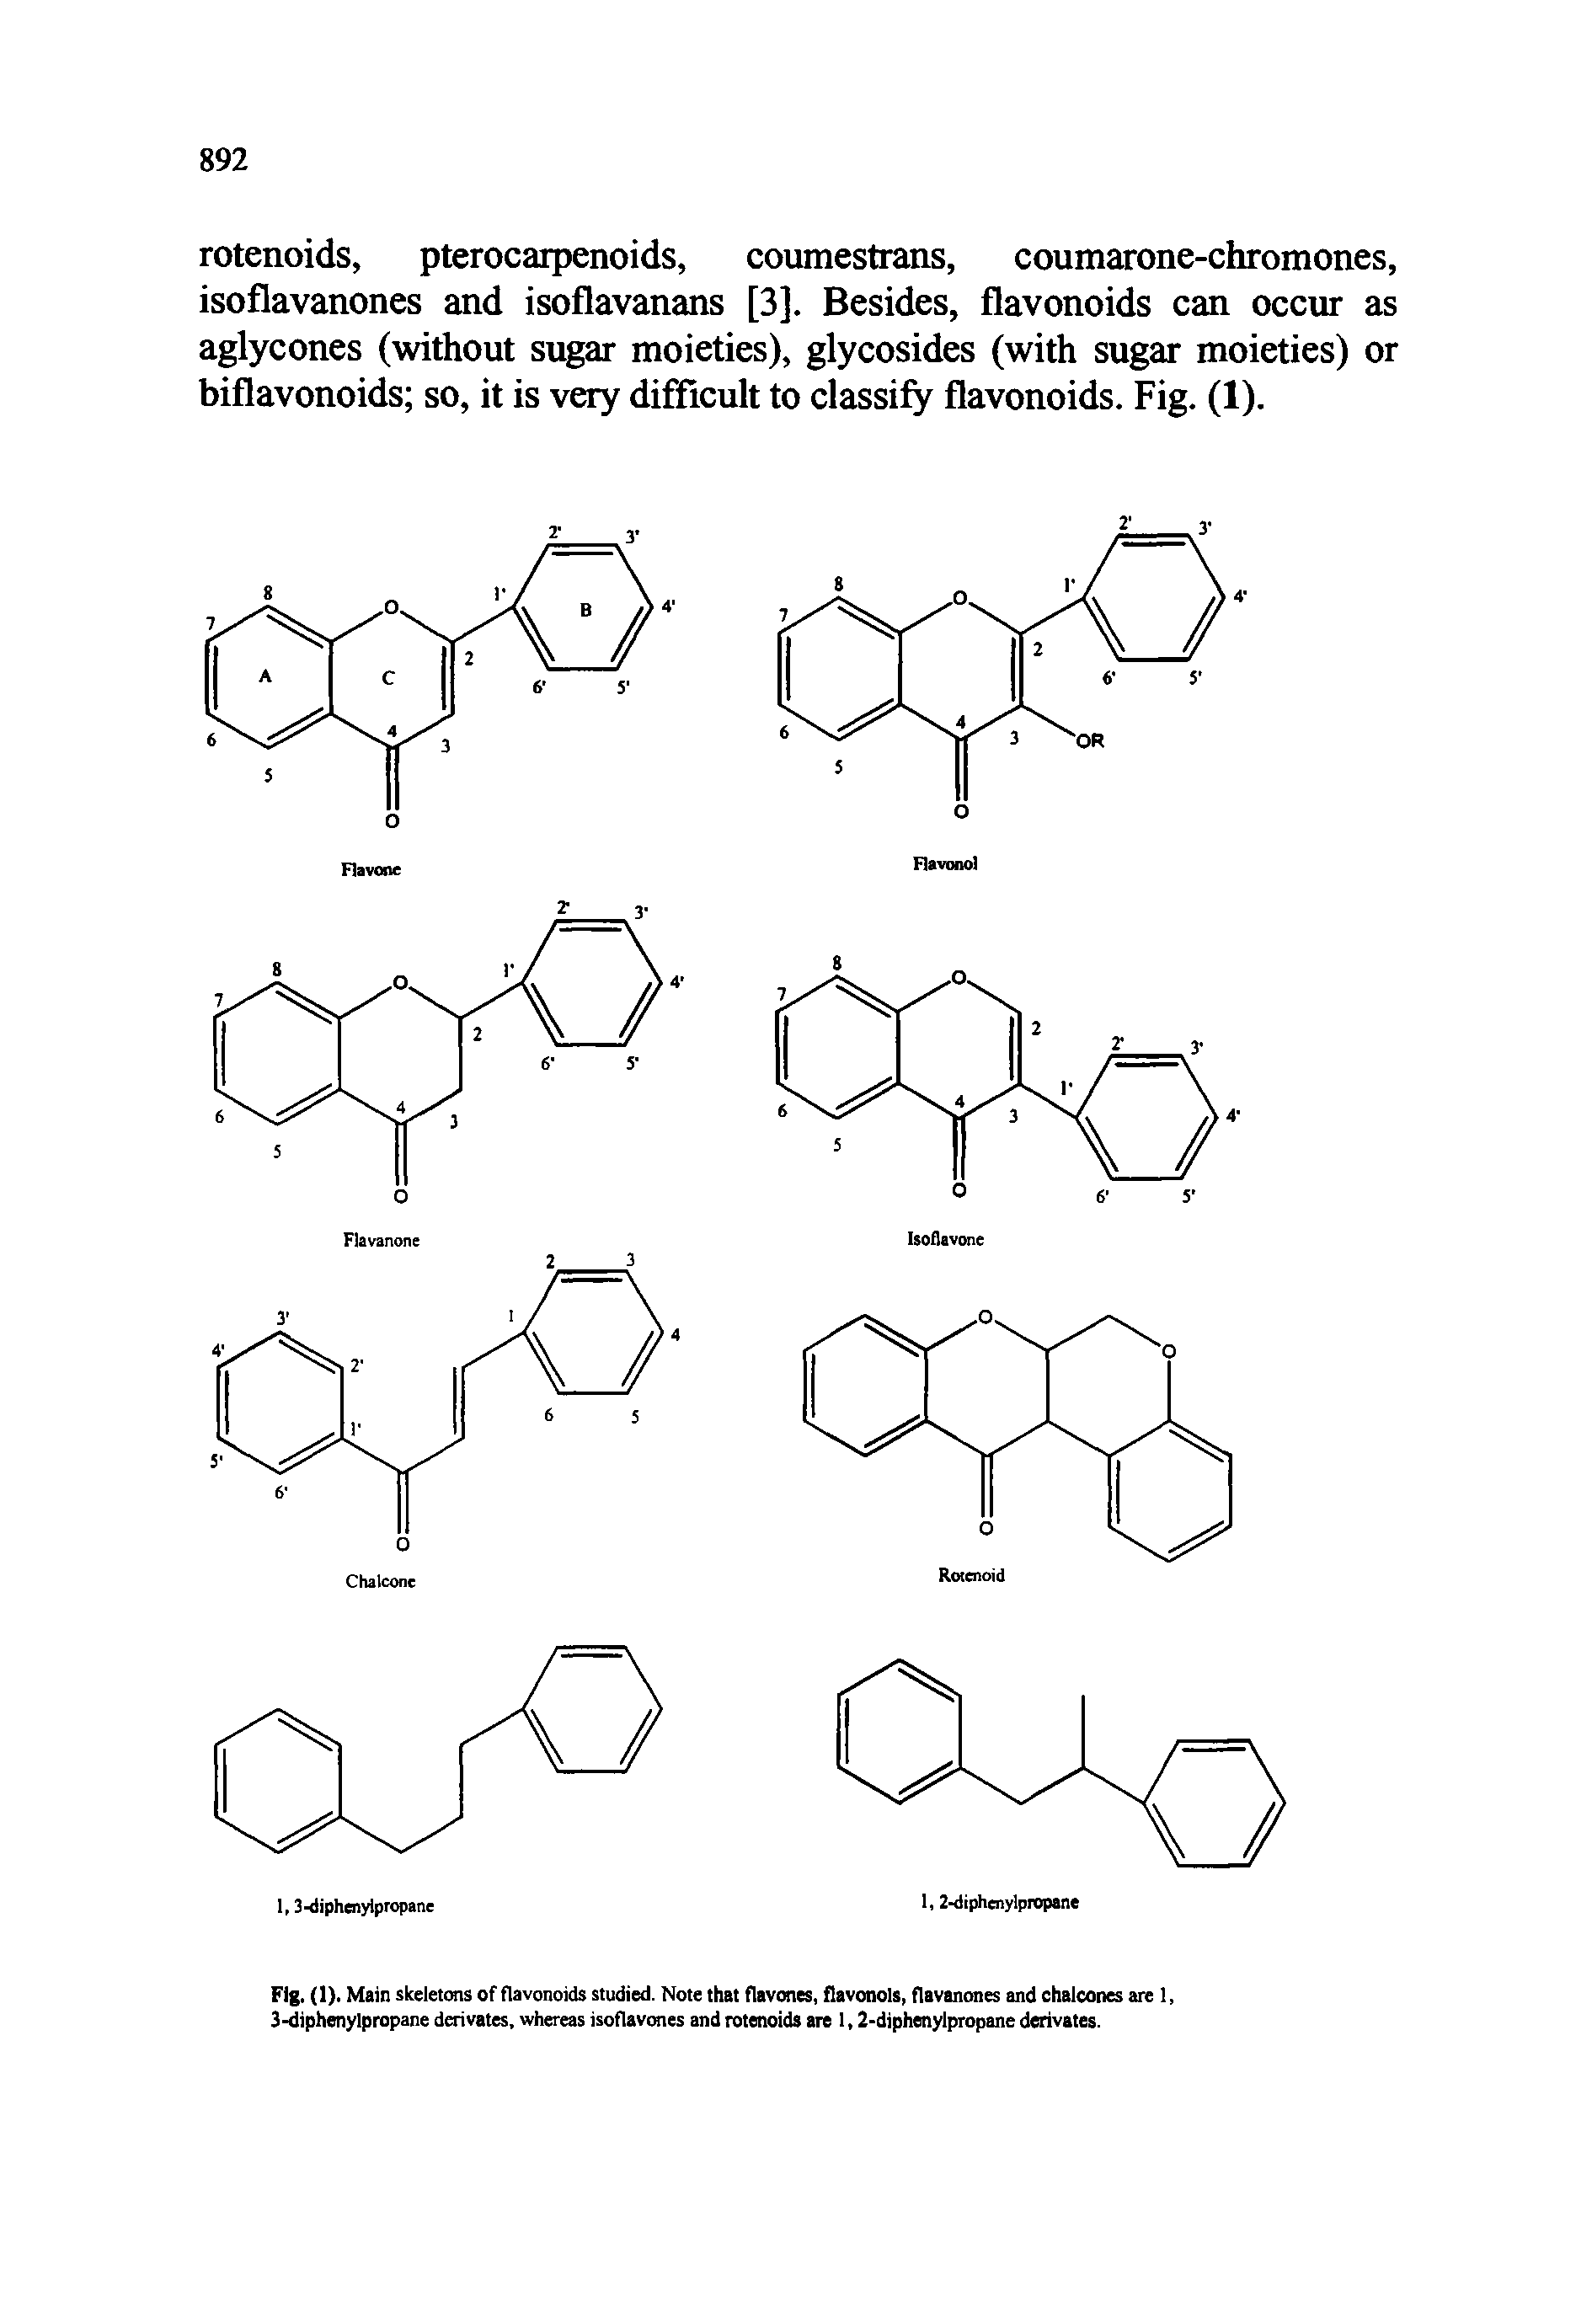 Fig. (1). Main skeletons of flavonoids studied. Note that flavones, flavonols, flavanones and chalconesare 1, 3-diphenylpropane derivates, whereas isoflavones and rotenoids are 1,2-diphenylpropane derivates.